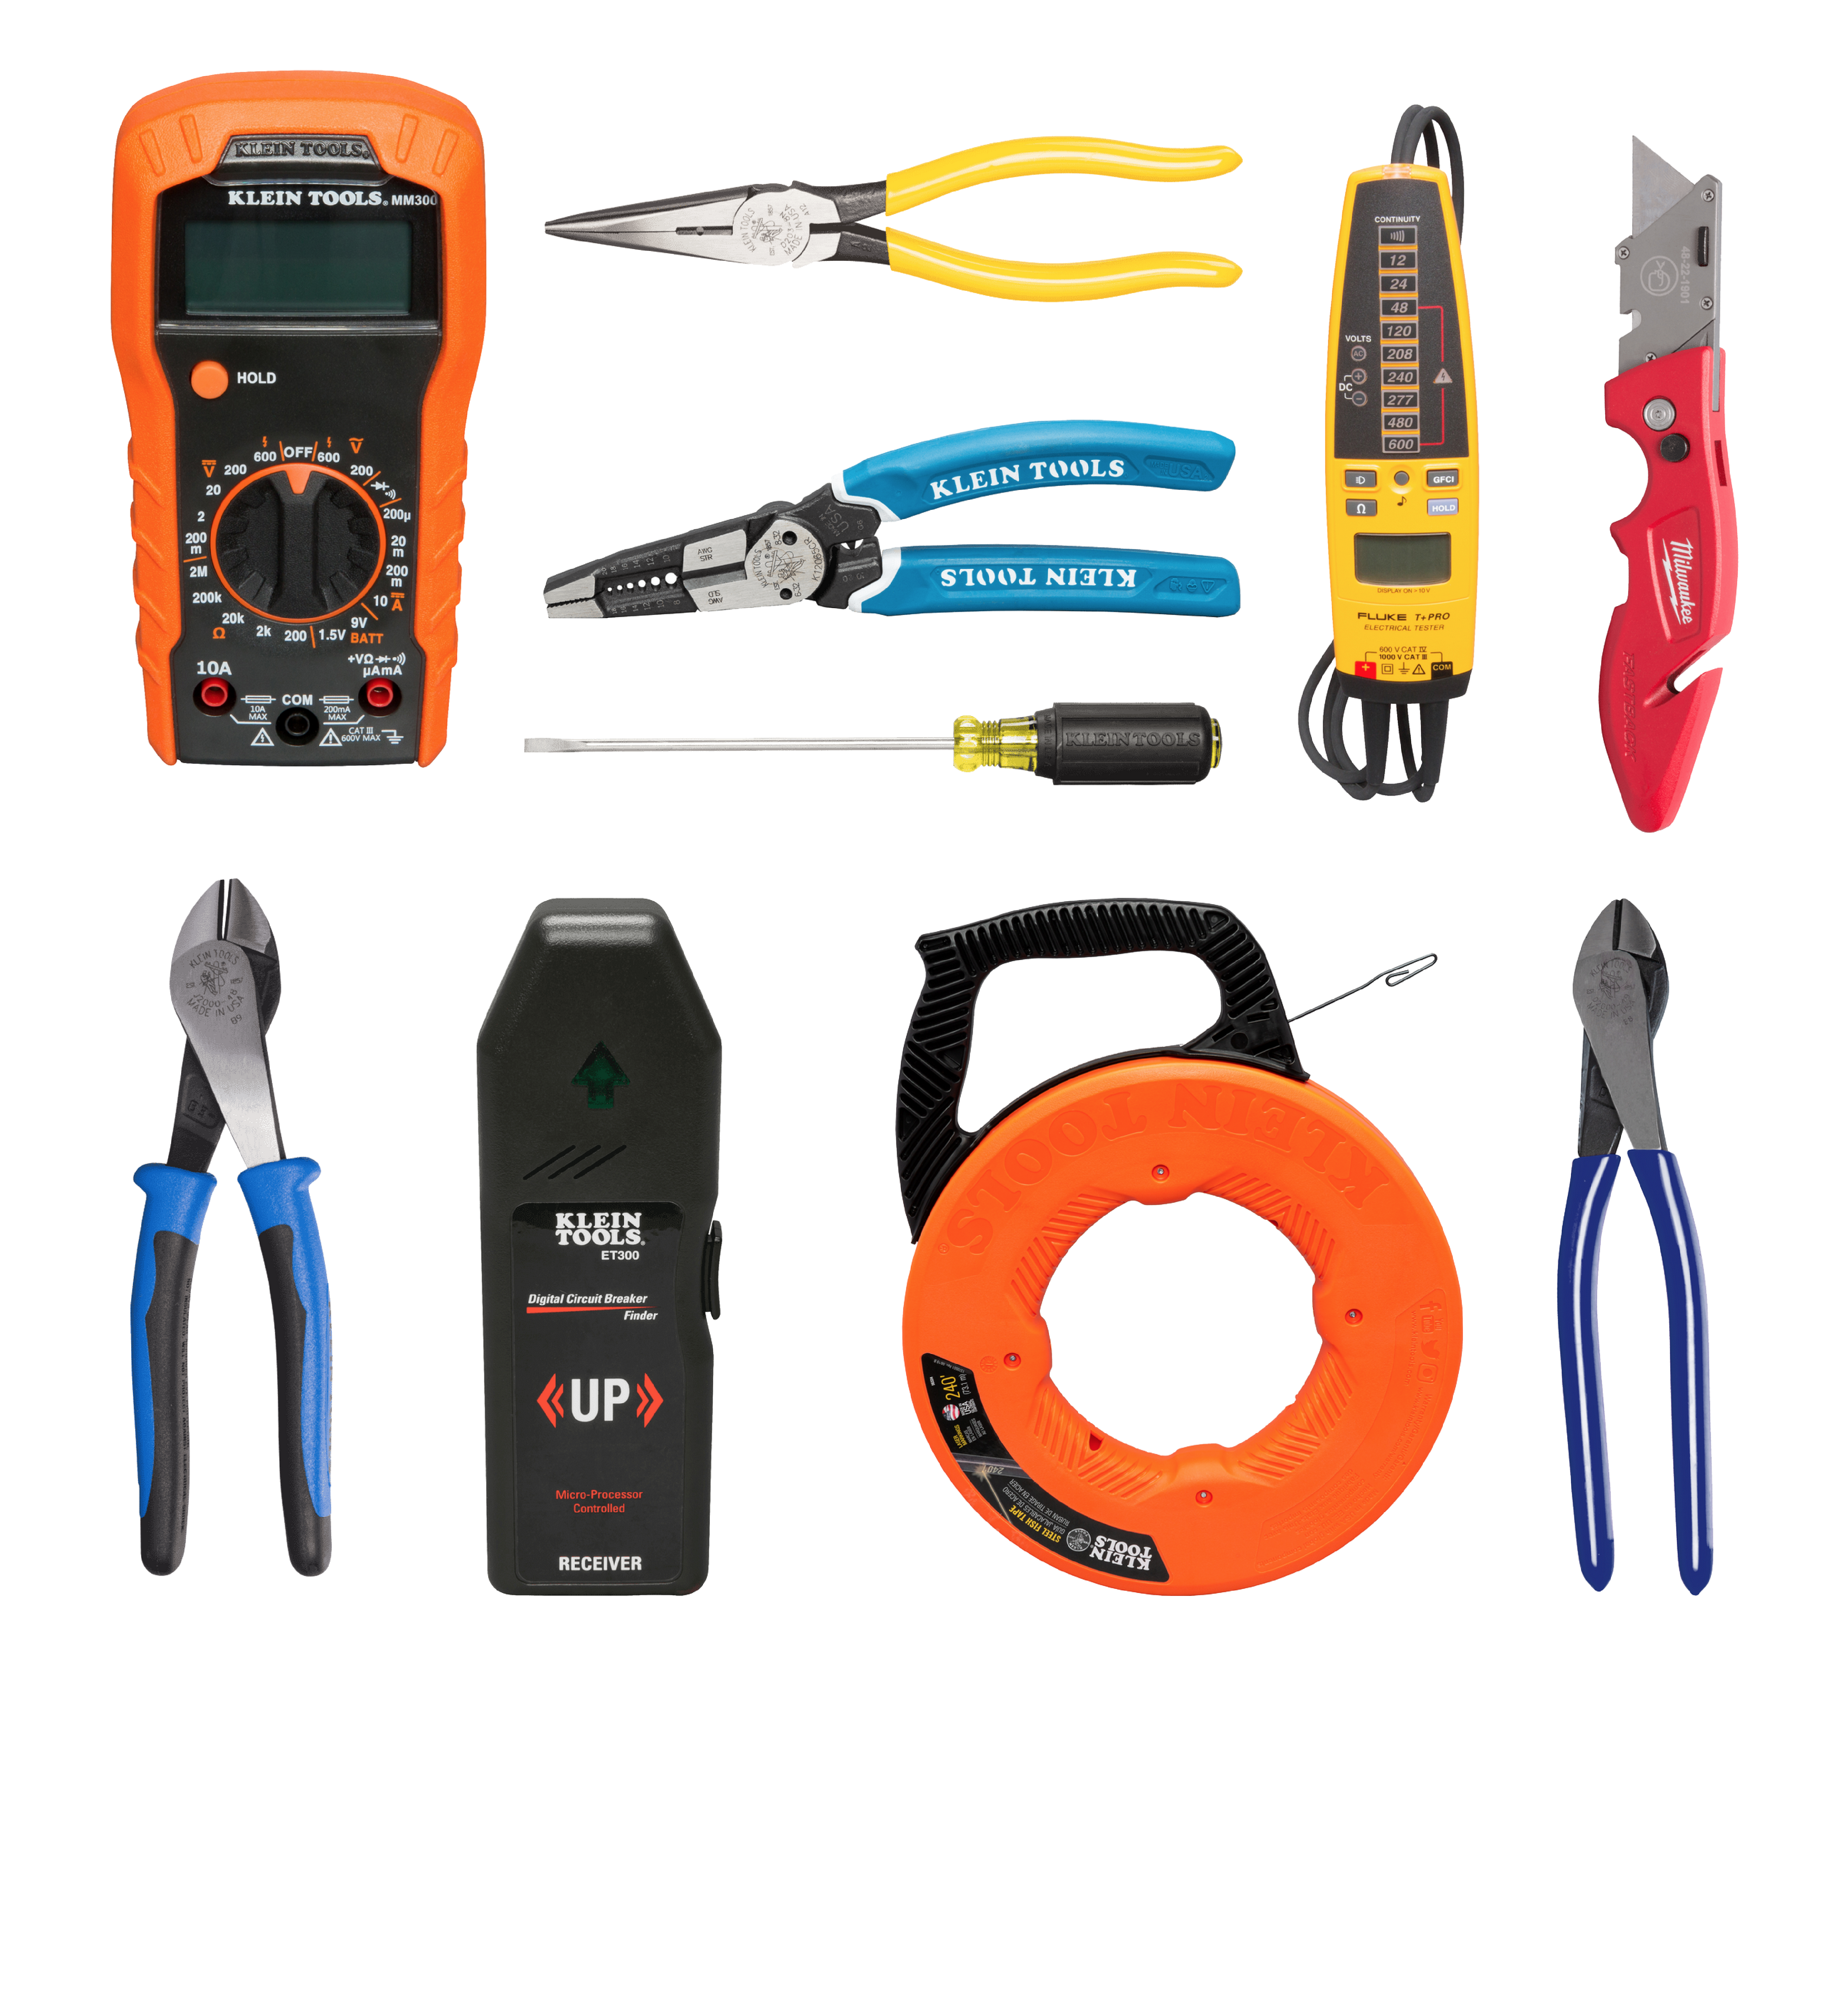 10 Tools Every Electrician Needs to Get the Job Done